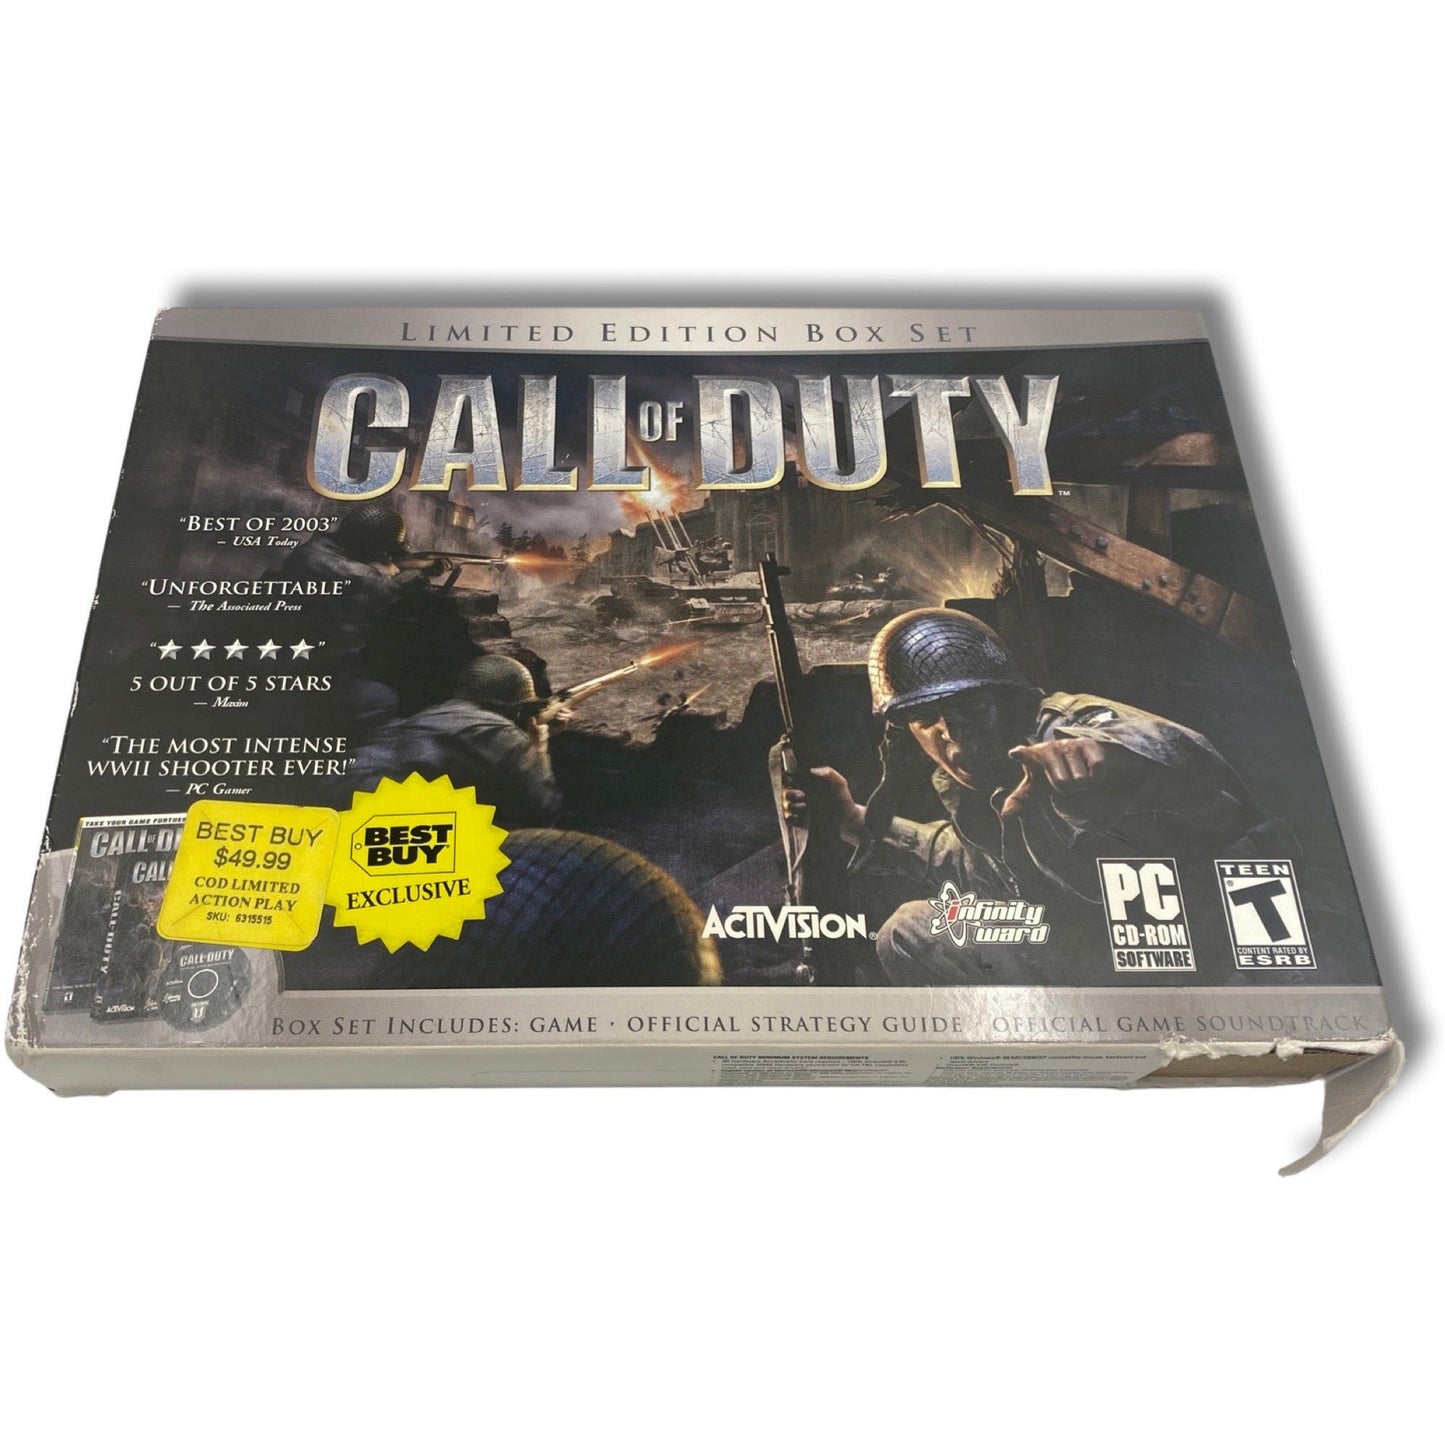 Call of Duty (Limited Edition Box Set) - PC